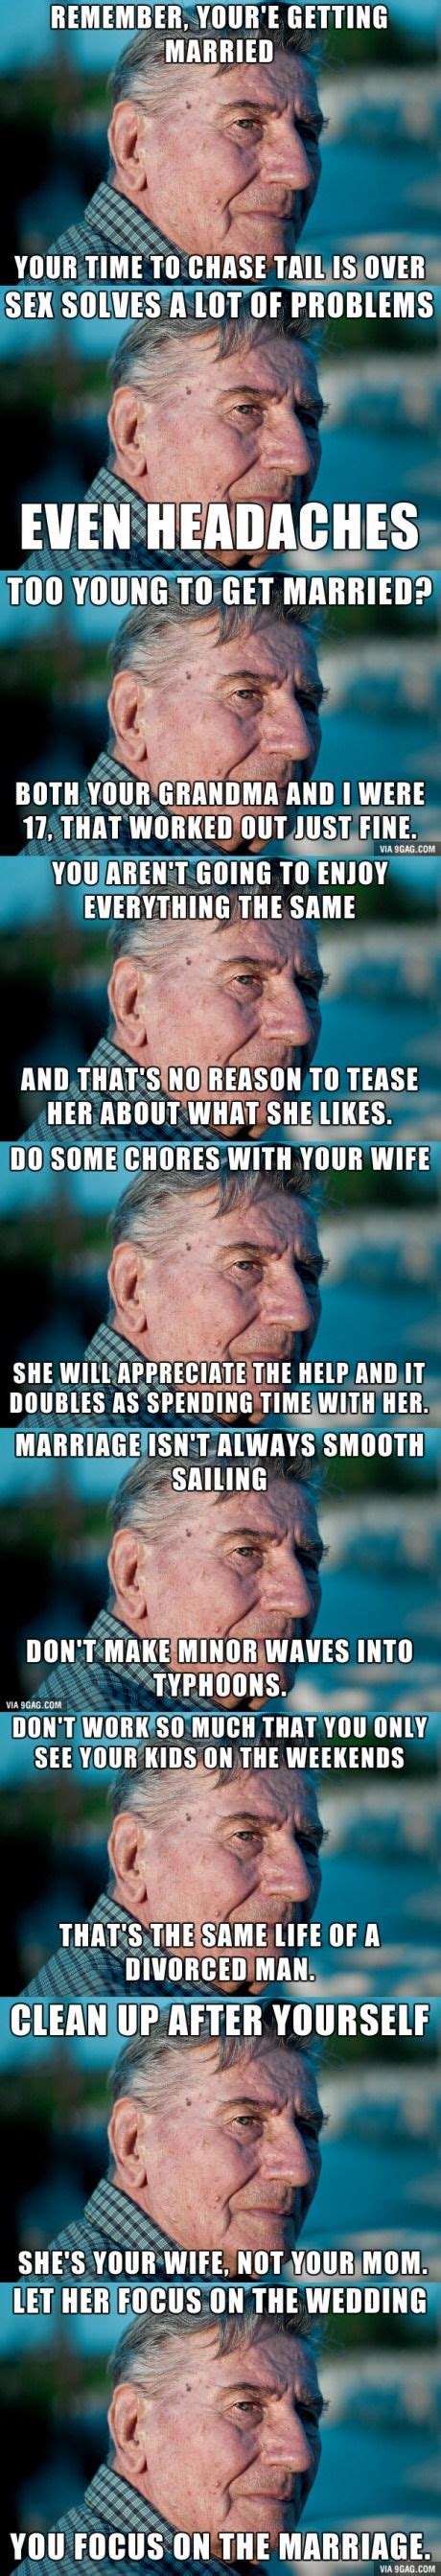 Look for your silver lining to keep the humor in your marriage alive with these funny quotes and advices. Best Marriage Advice-- Especially the clean up after ...